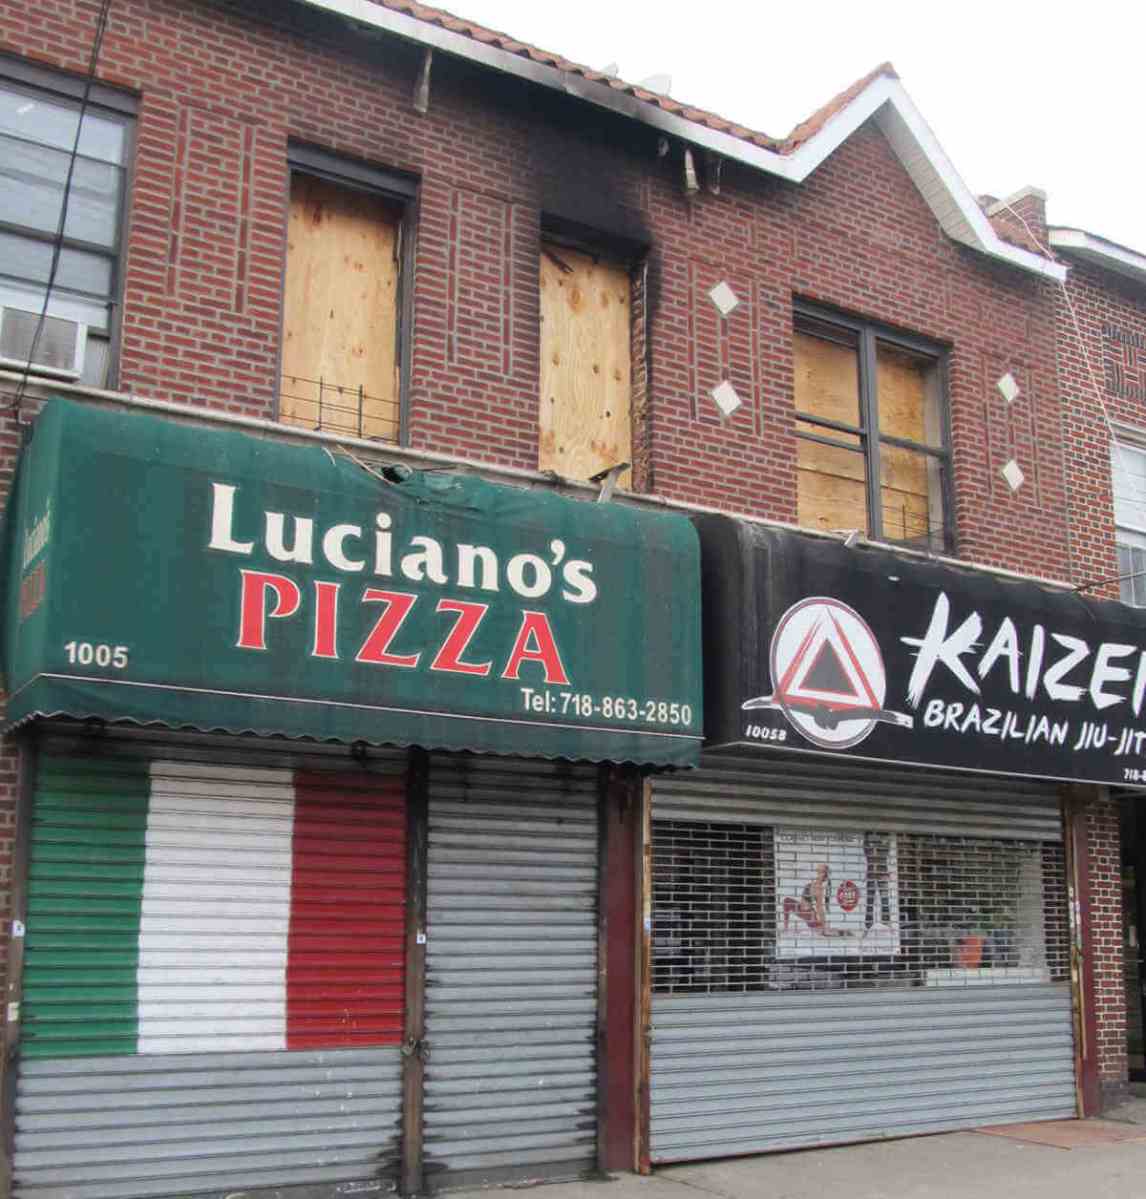 Alleged arson fire in knocks out 2 Morris Park stores|Alleged arson fire in knocks out 2 Morris Park stores